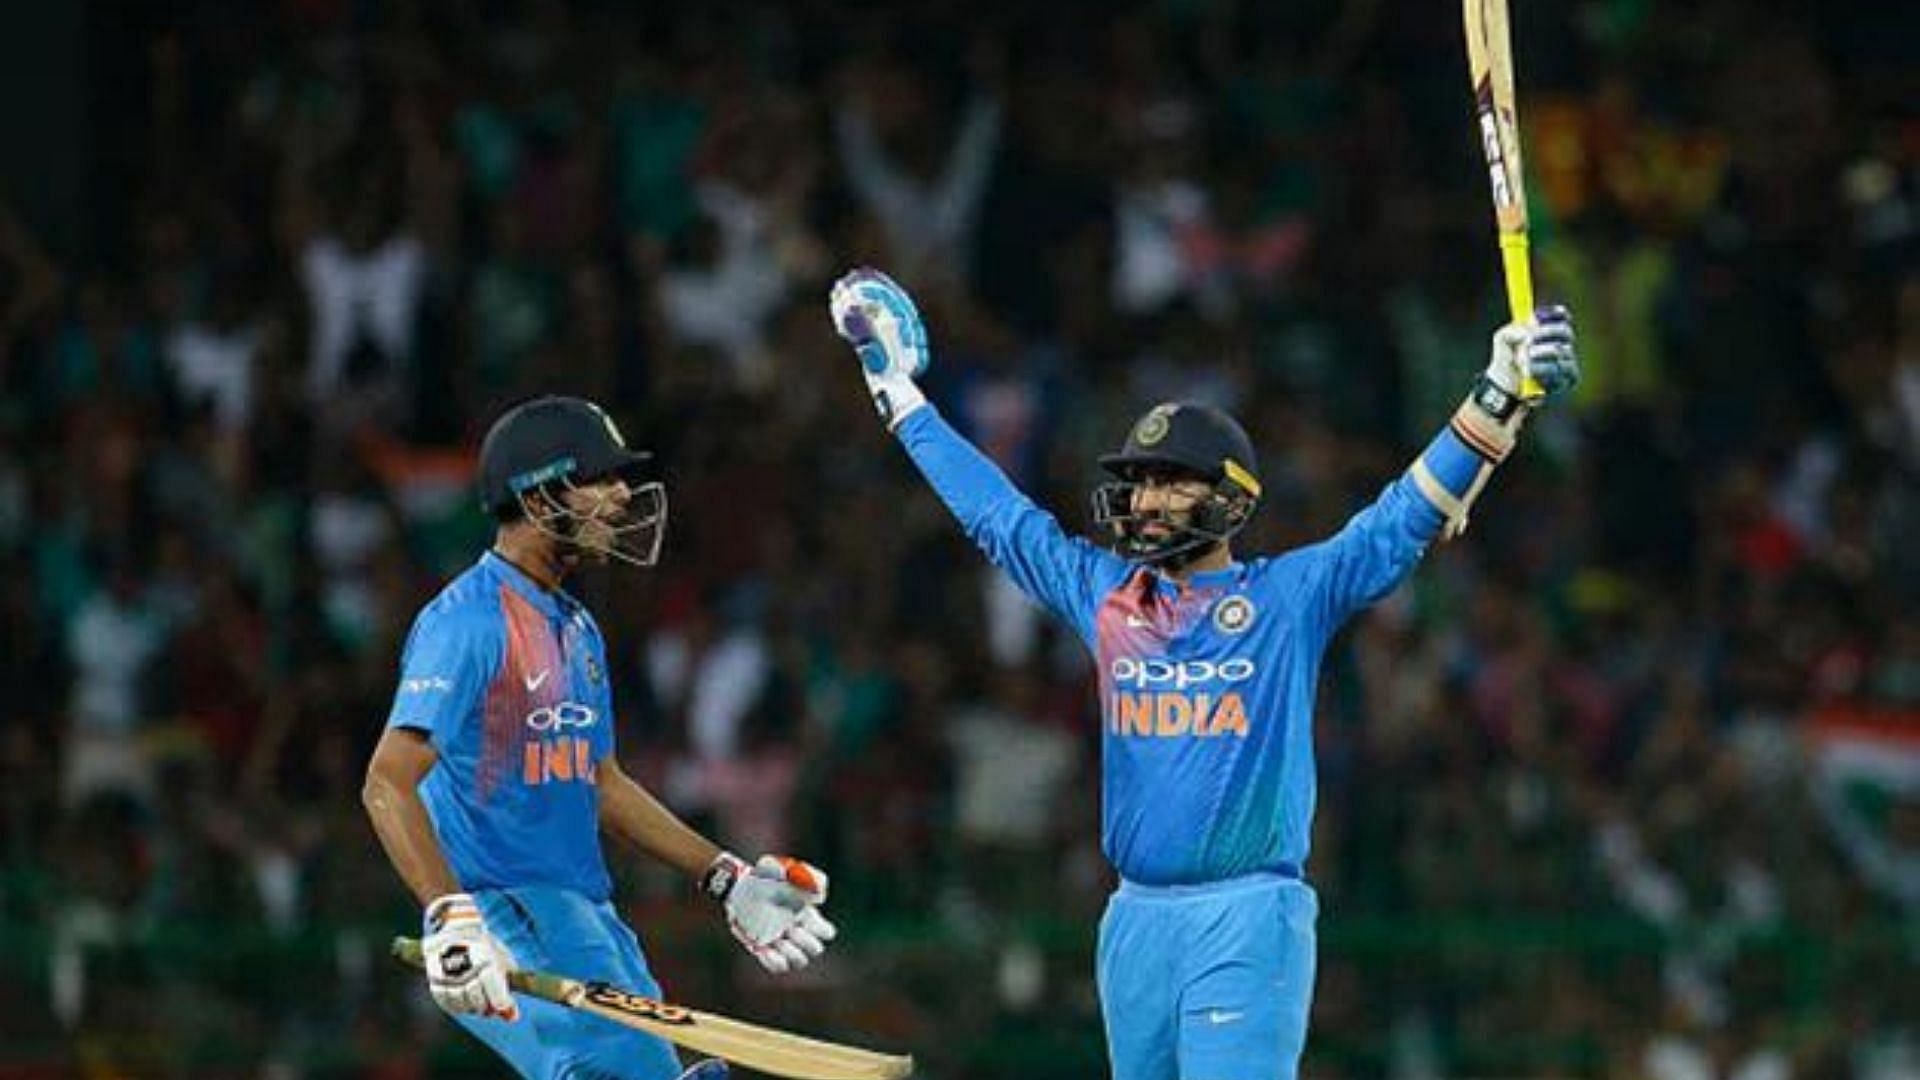 “If you in believe yourself, everything will fall into place” - Dinesh Karthik reacts after earning India recall for T20I series against South Africa